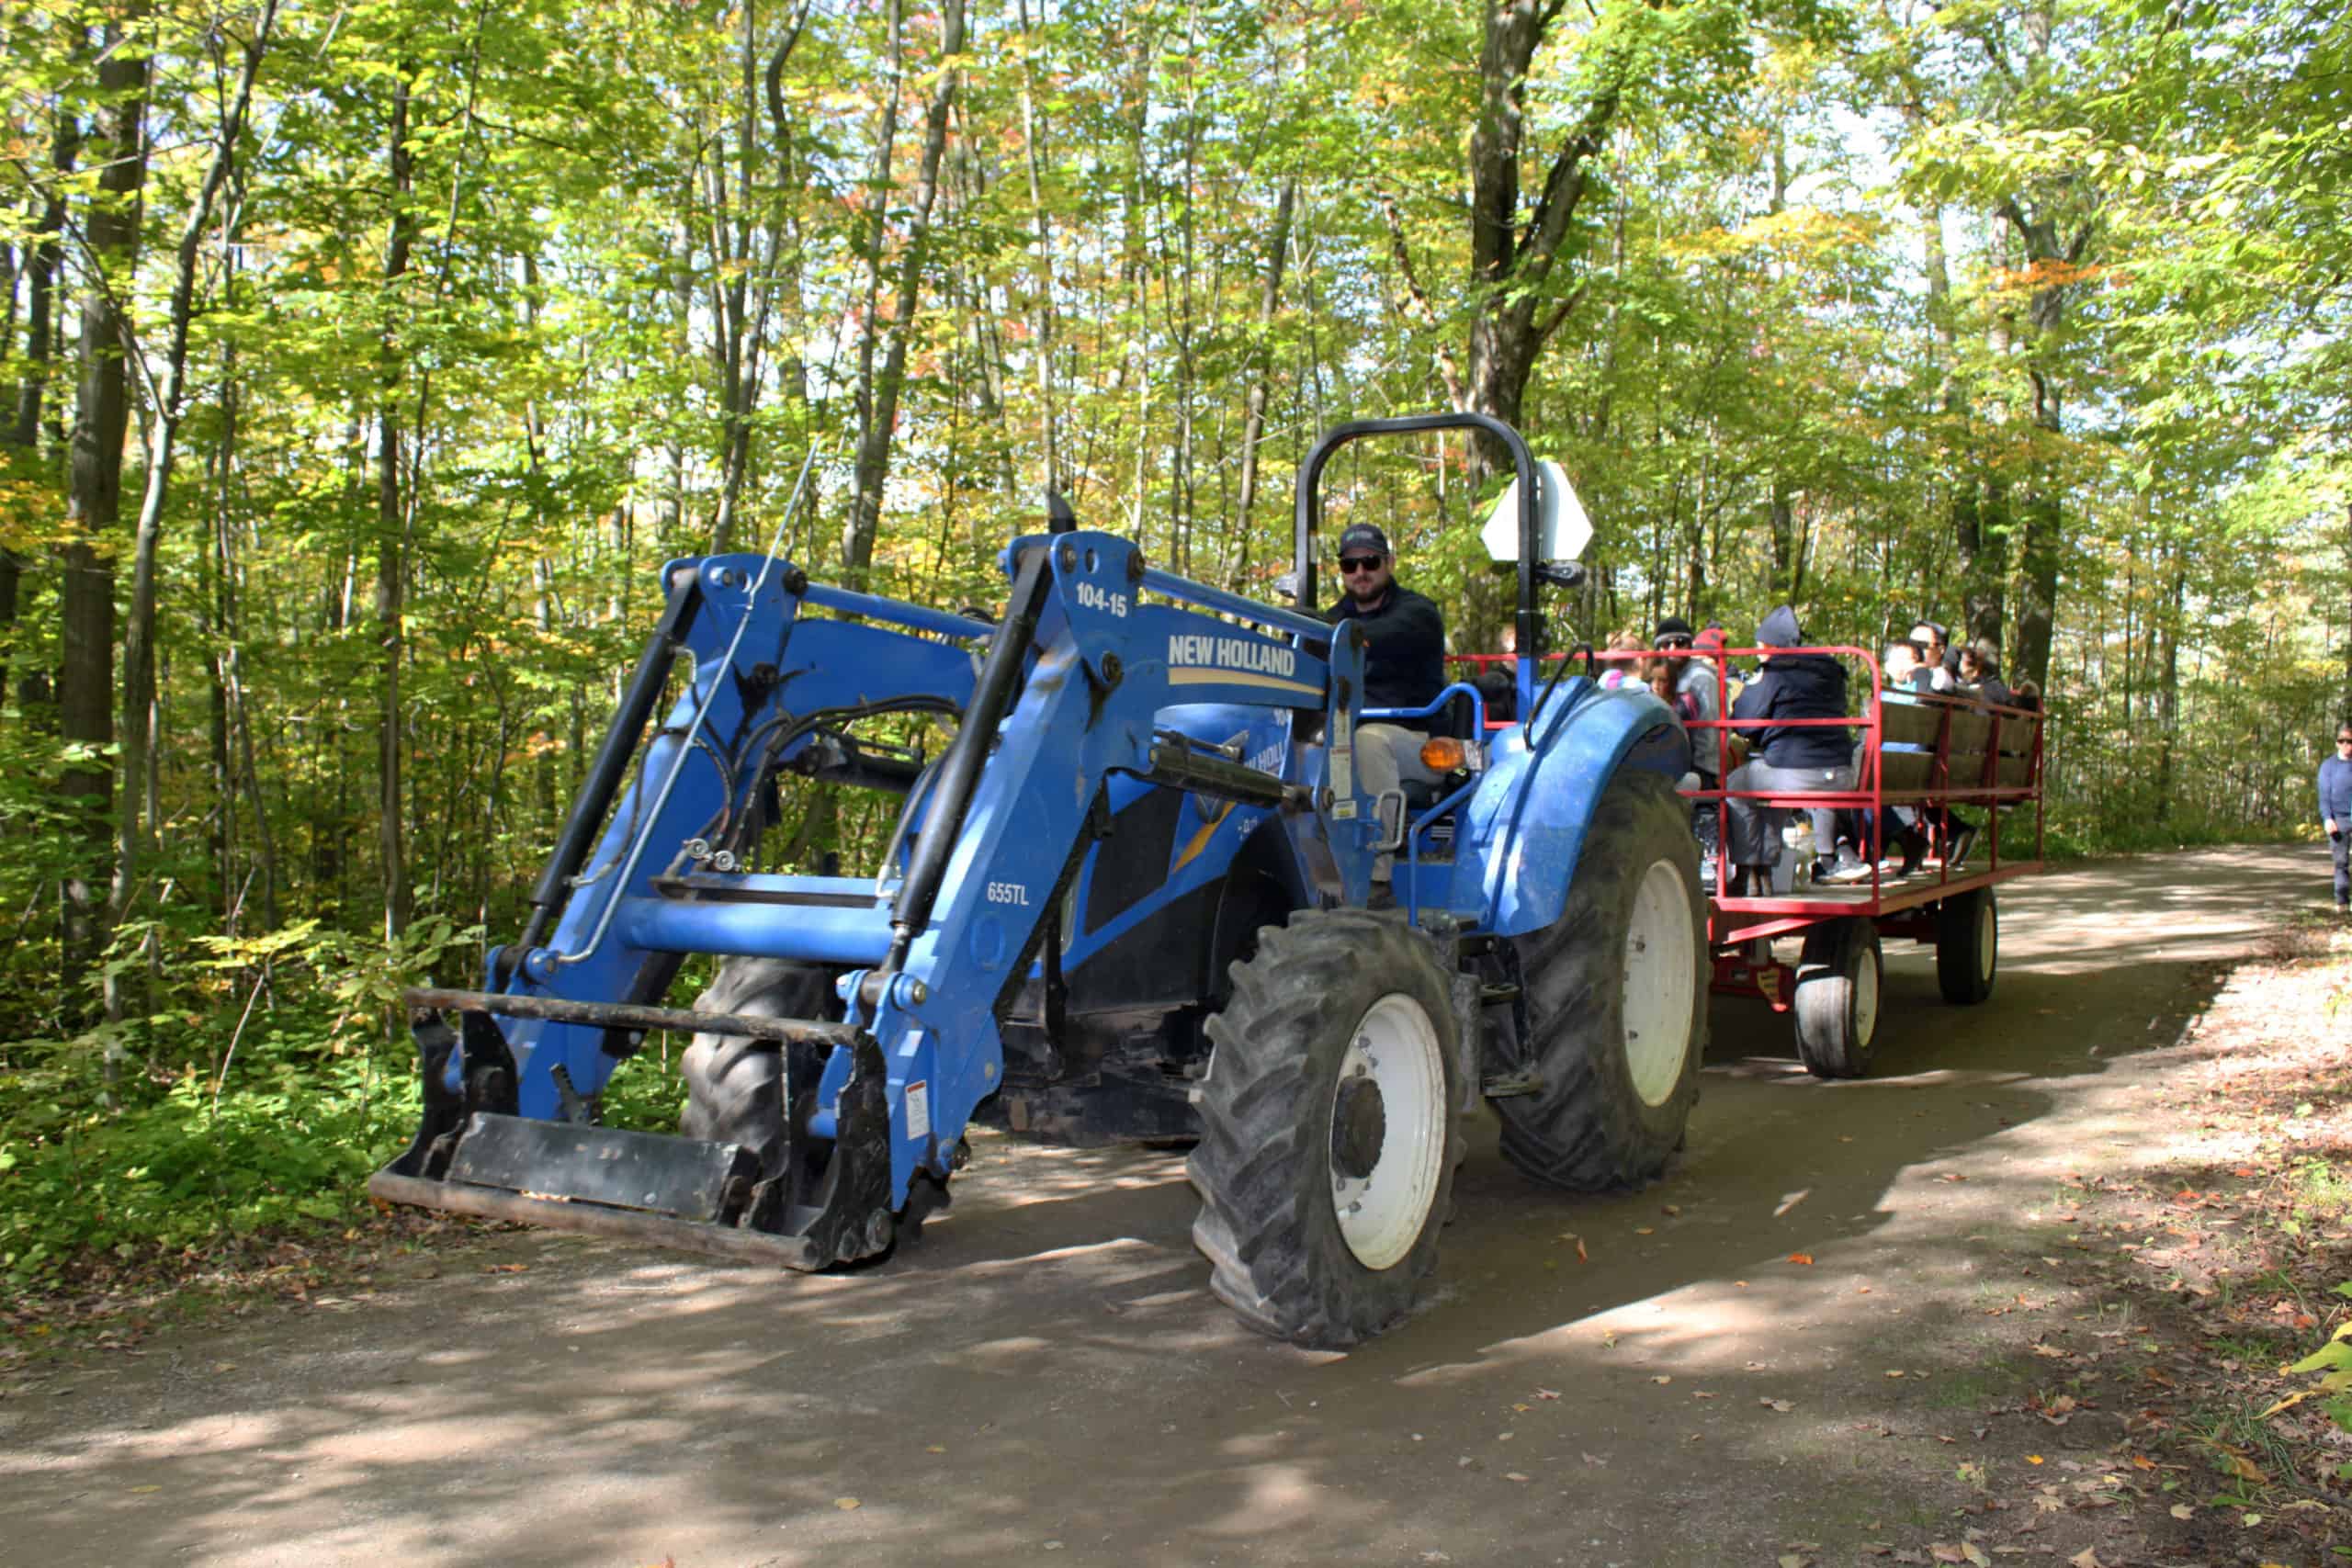 a tractor pulling a wagon with people in it through a forested area